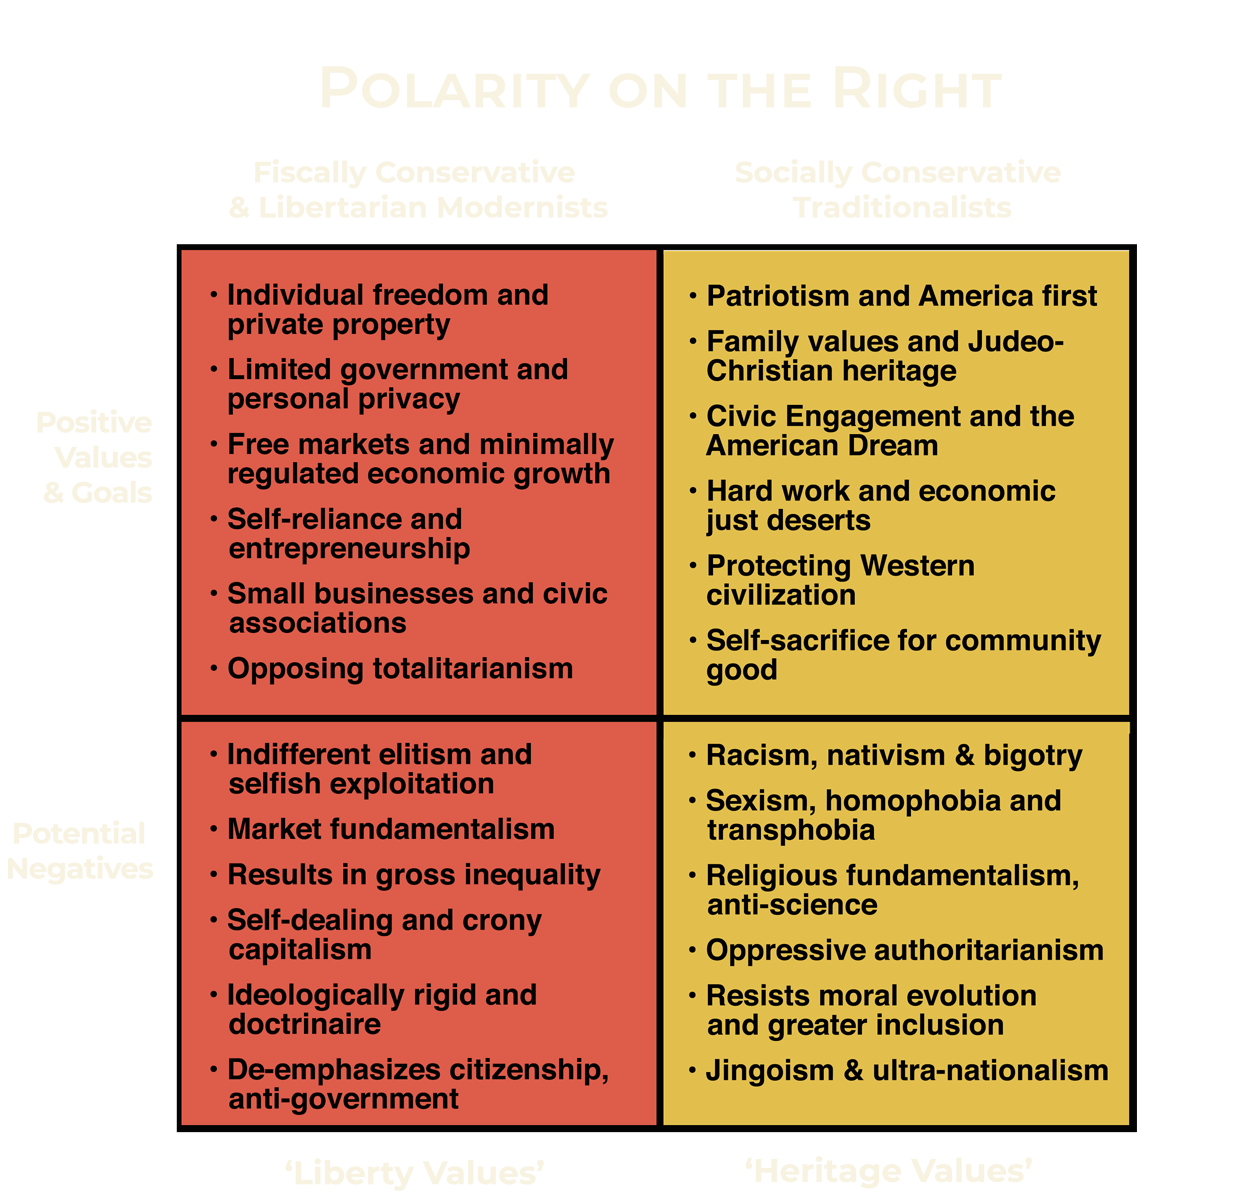 Polarity on the Right